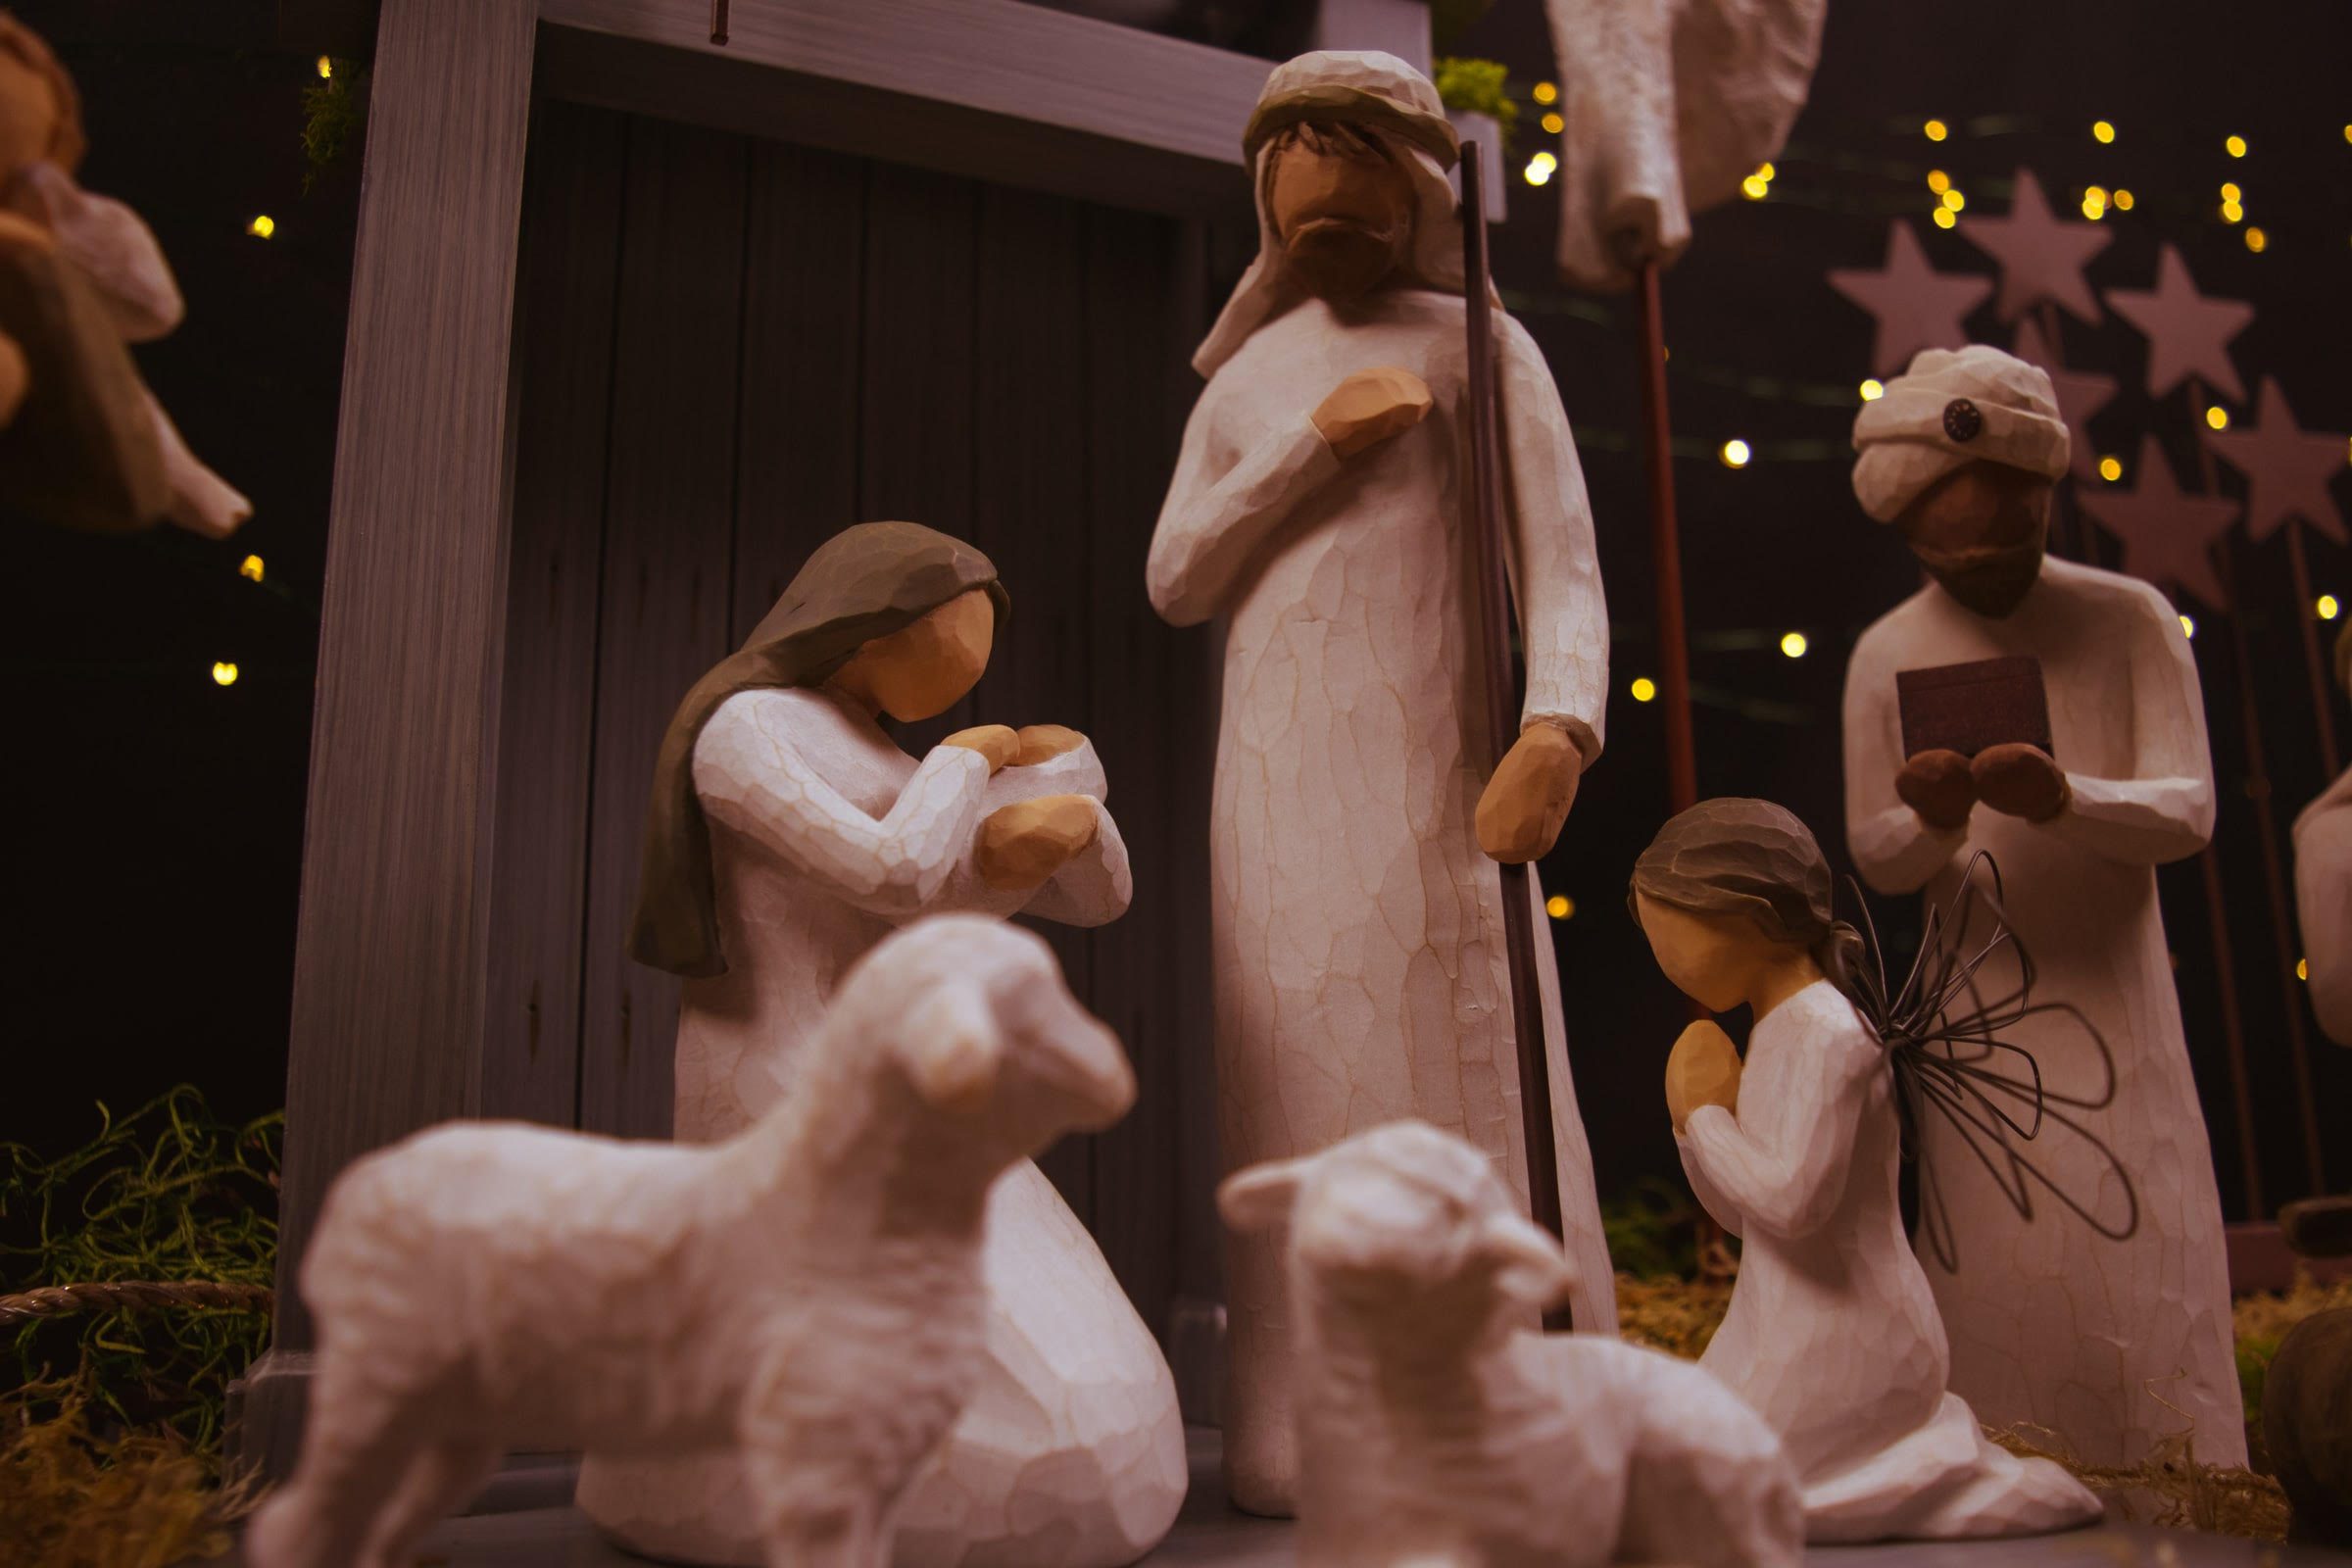 A nativity scene with wooden figures